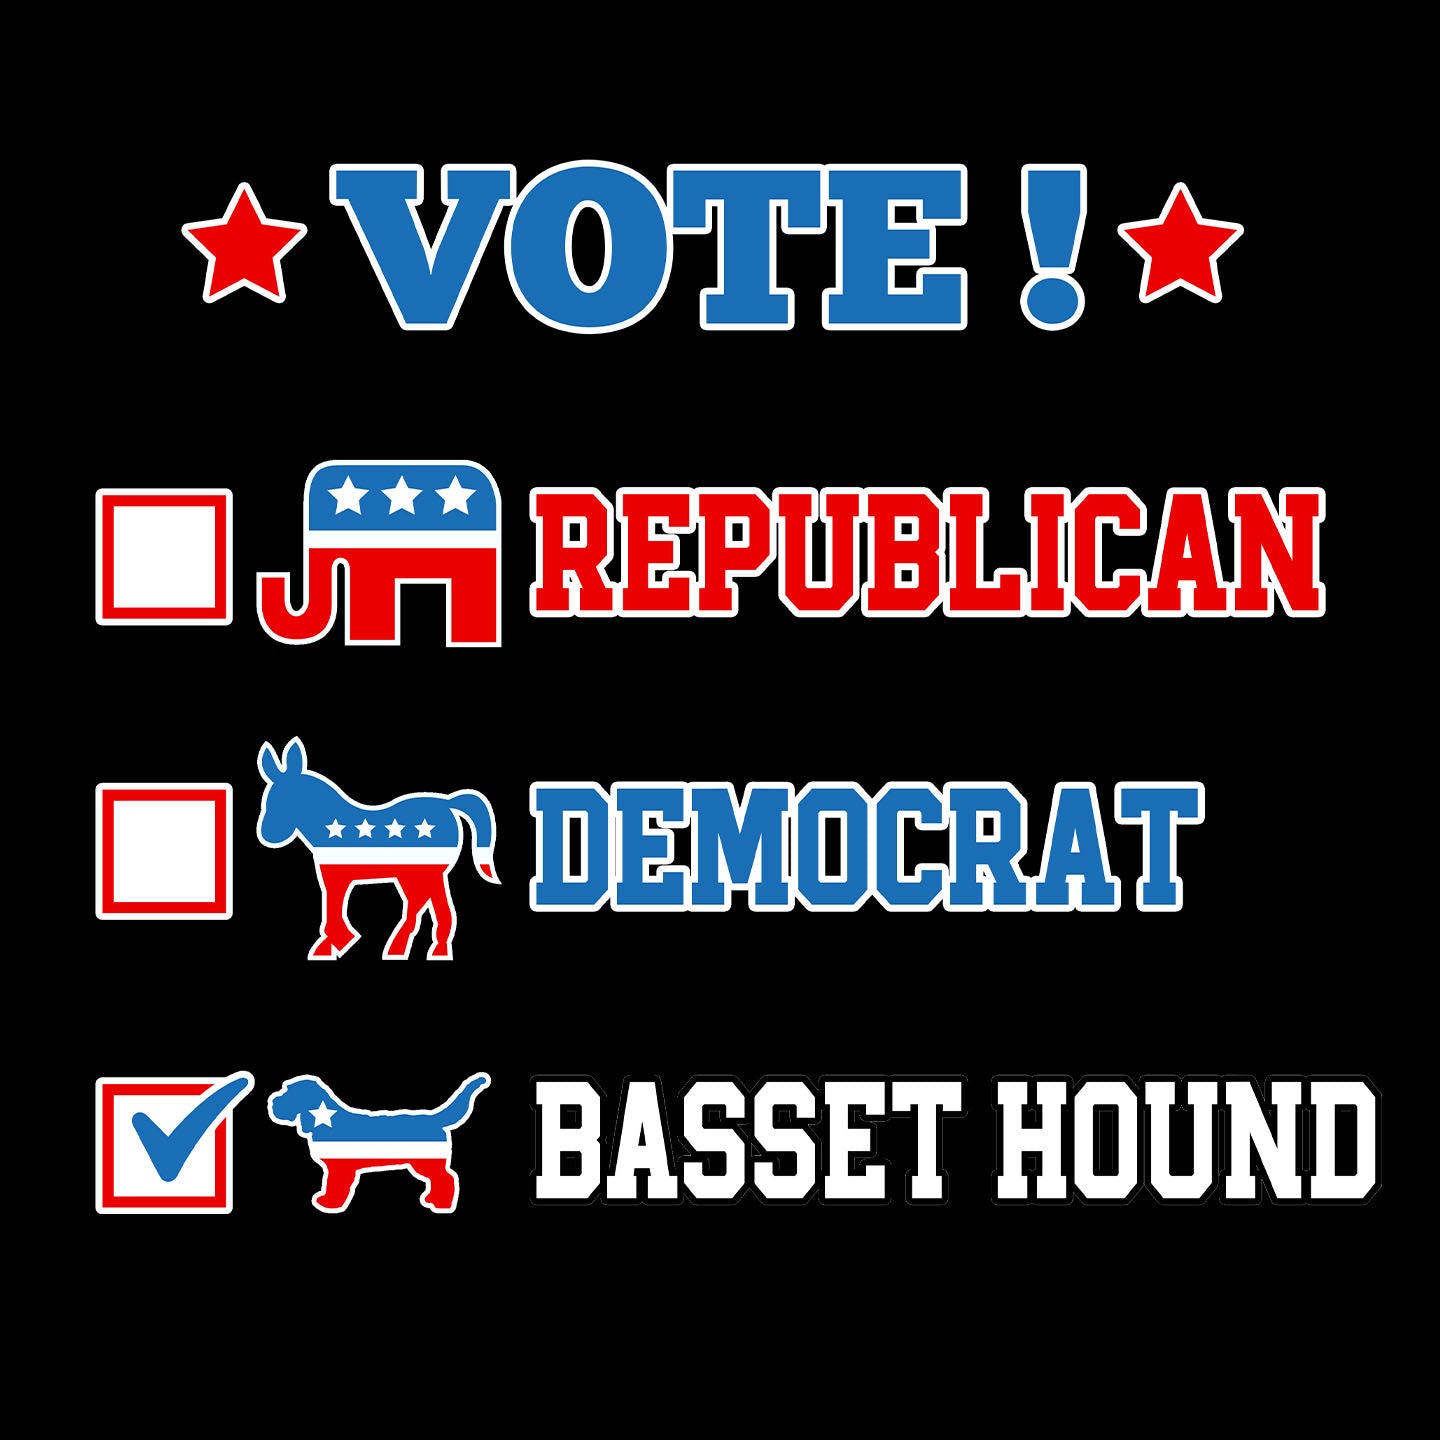 Vote for the Basset Hound - Adult Unisex T-Shirt